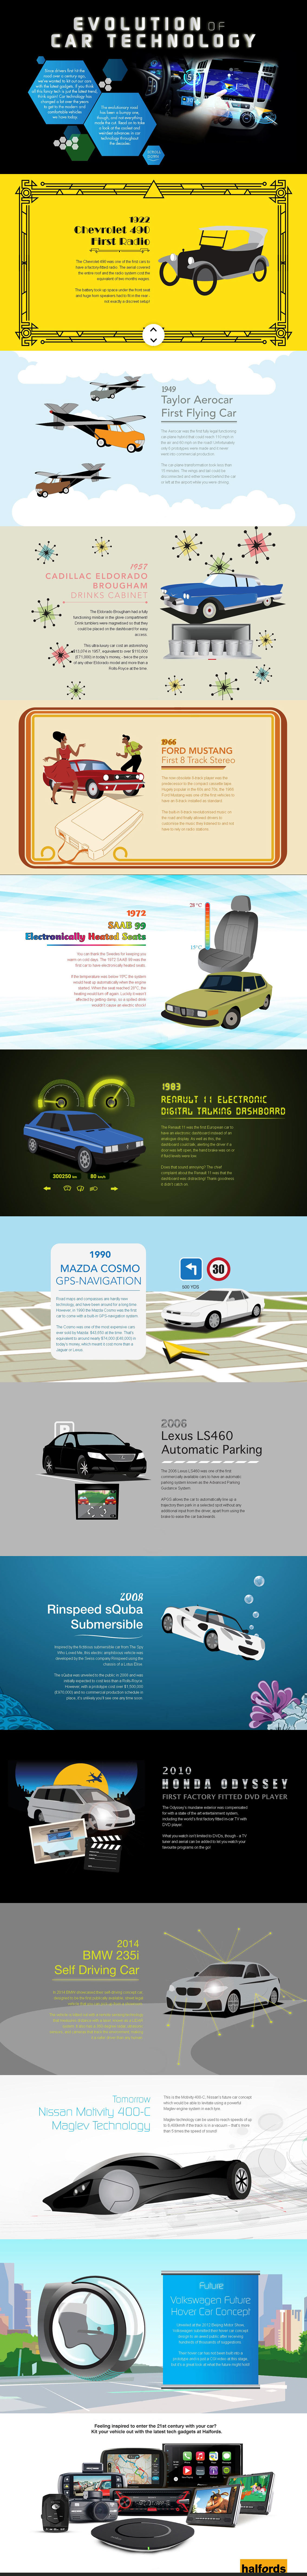 Evolution of Car Technology Infographic